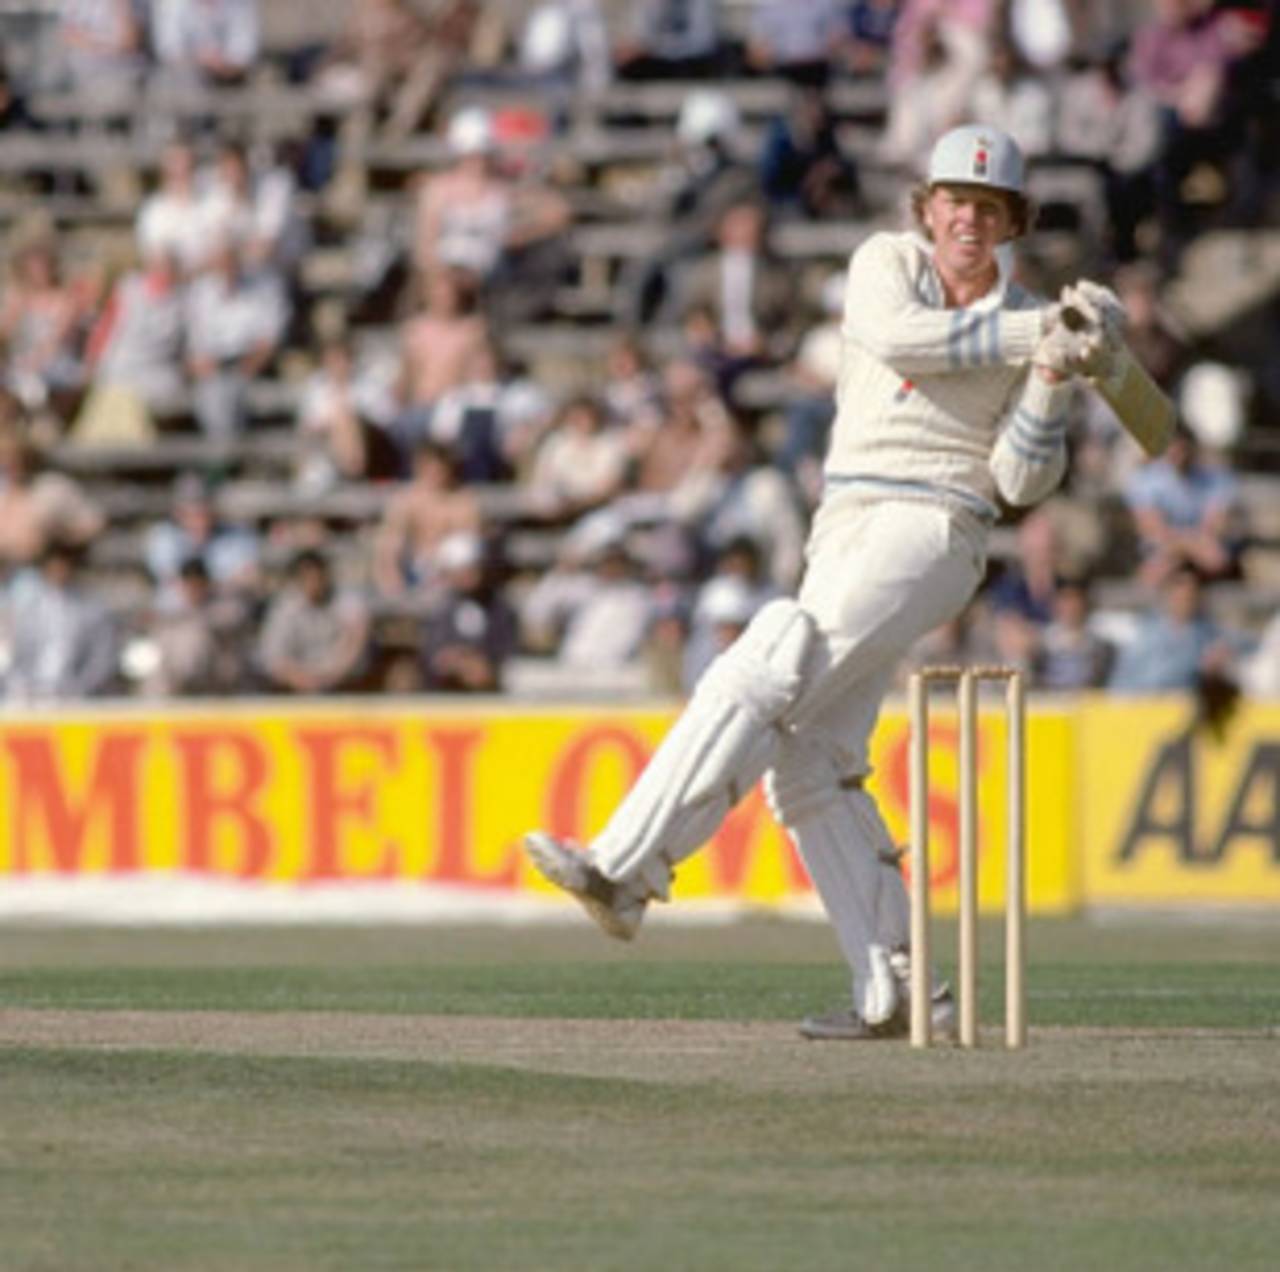 Barry Richards is one of only three South African batsmen to finish his Test career with a century&nbsp;&nbsp;&bull;&nbsp;&nbsp;Adrian Murrell/Getty Images